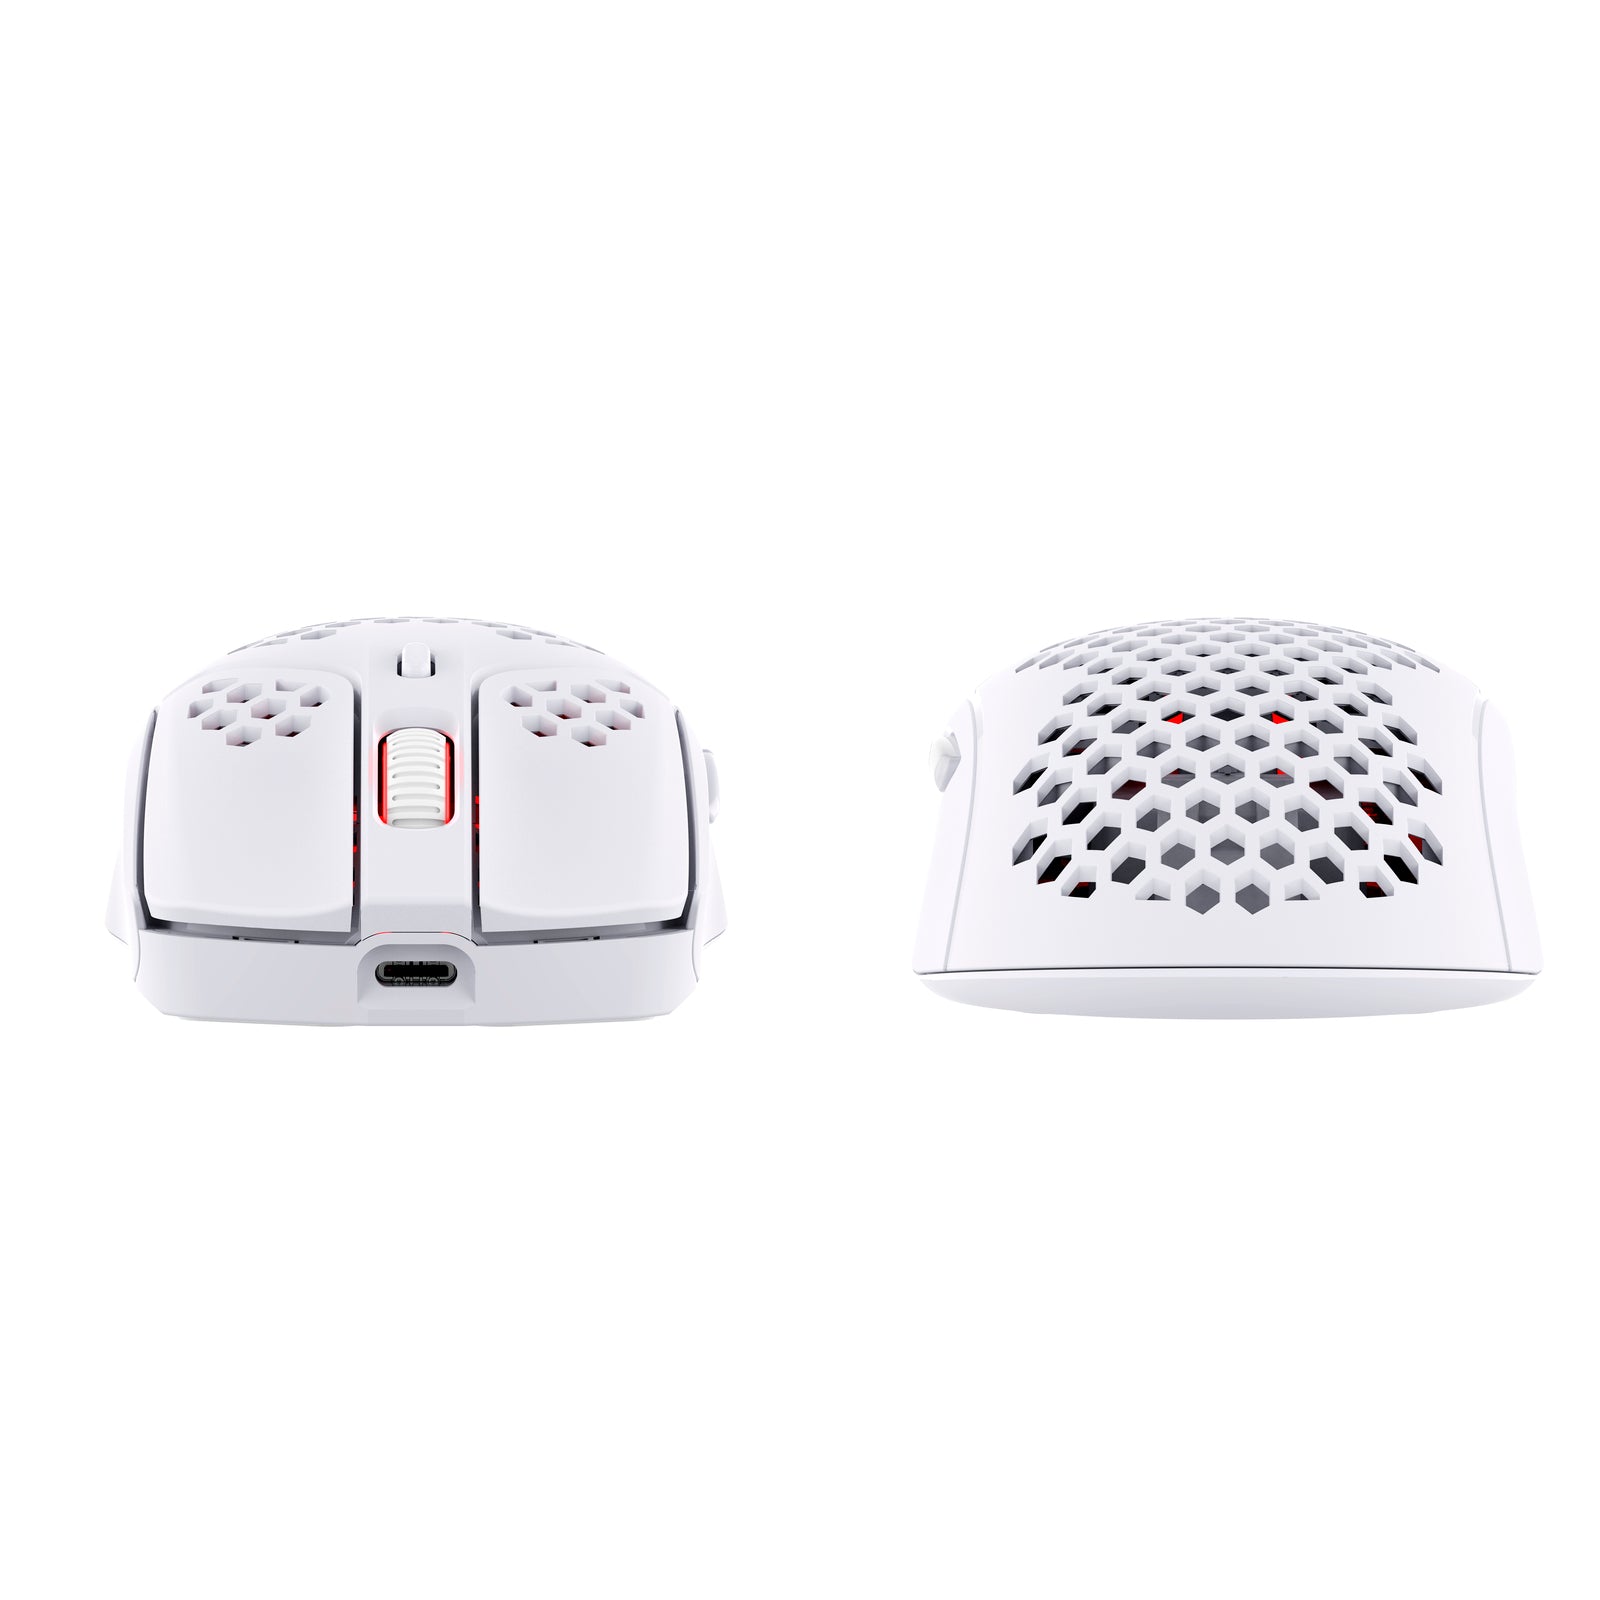 HyperX Pulsefire Haste Wireless White gaming mouse front edge view, featuring the usb c port connection and the back side on the mouse